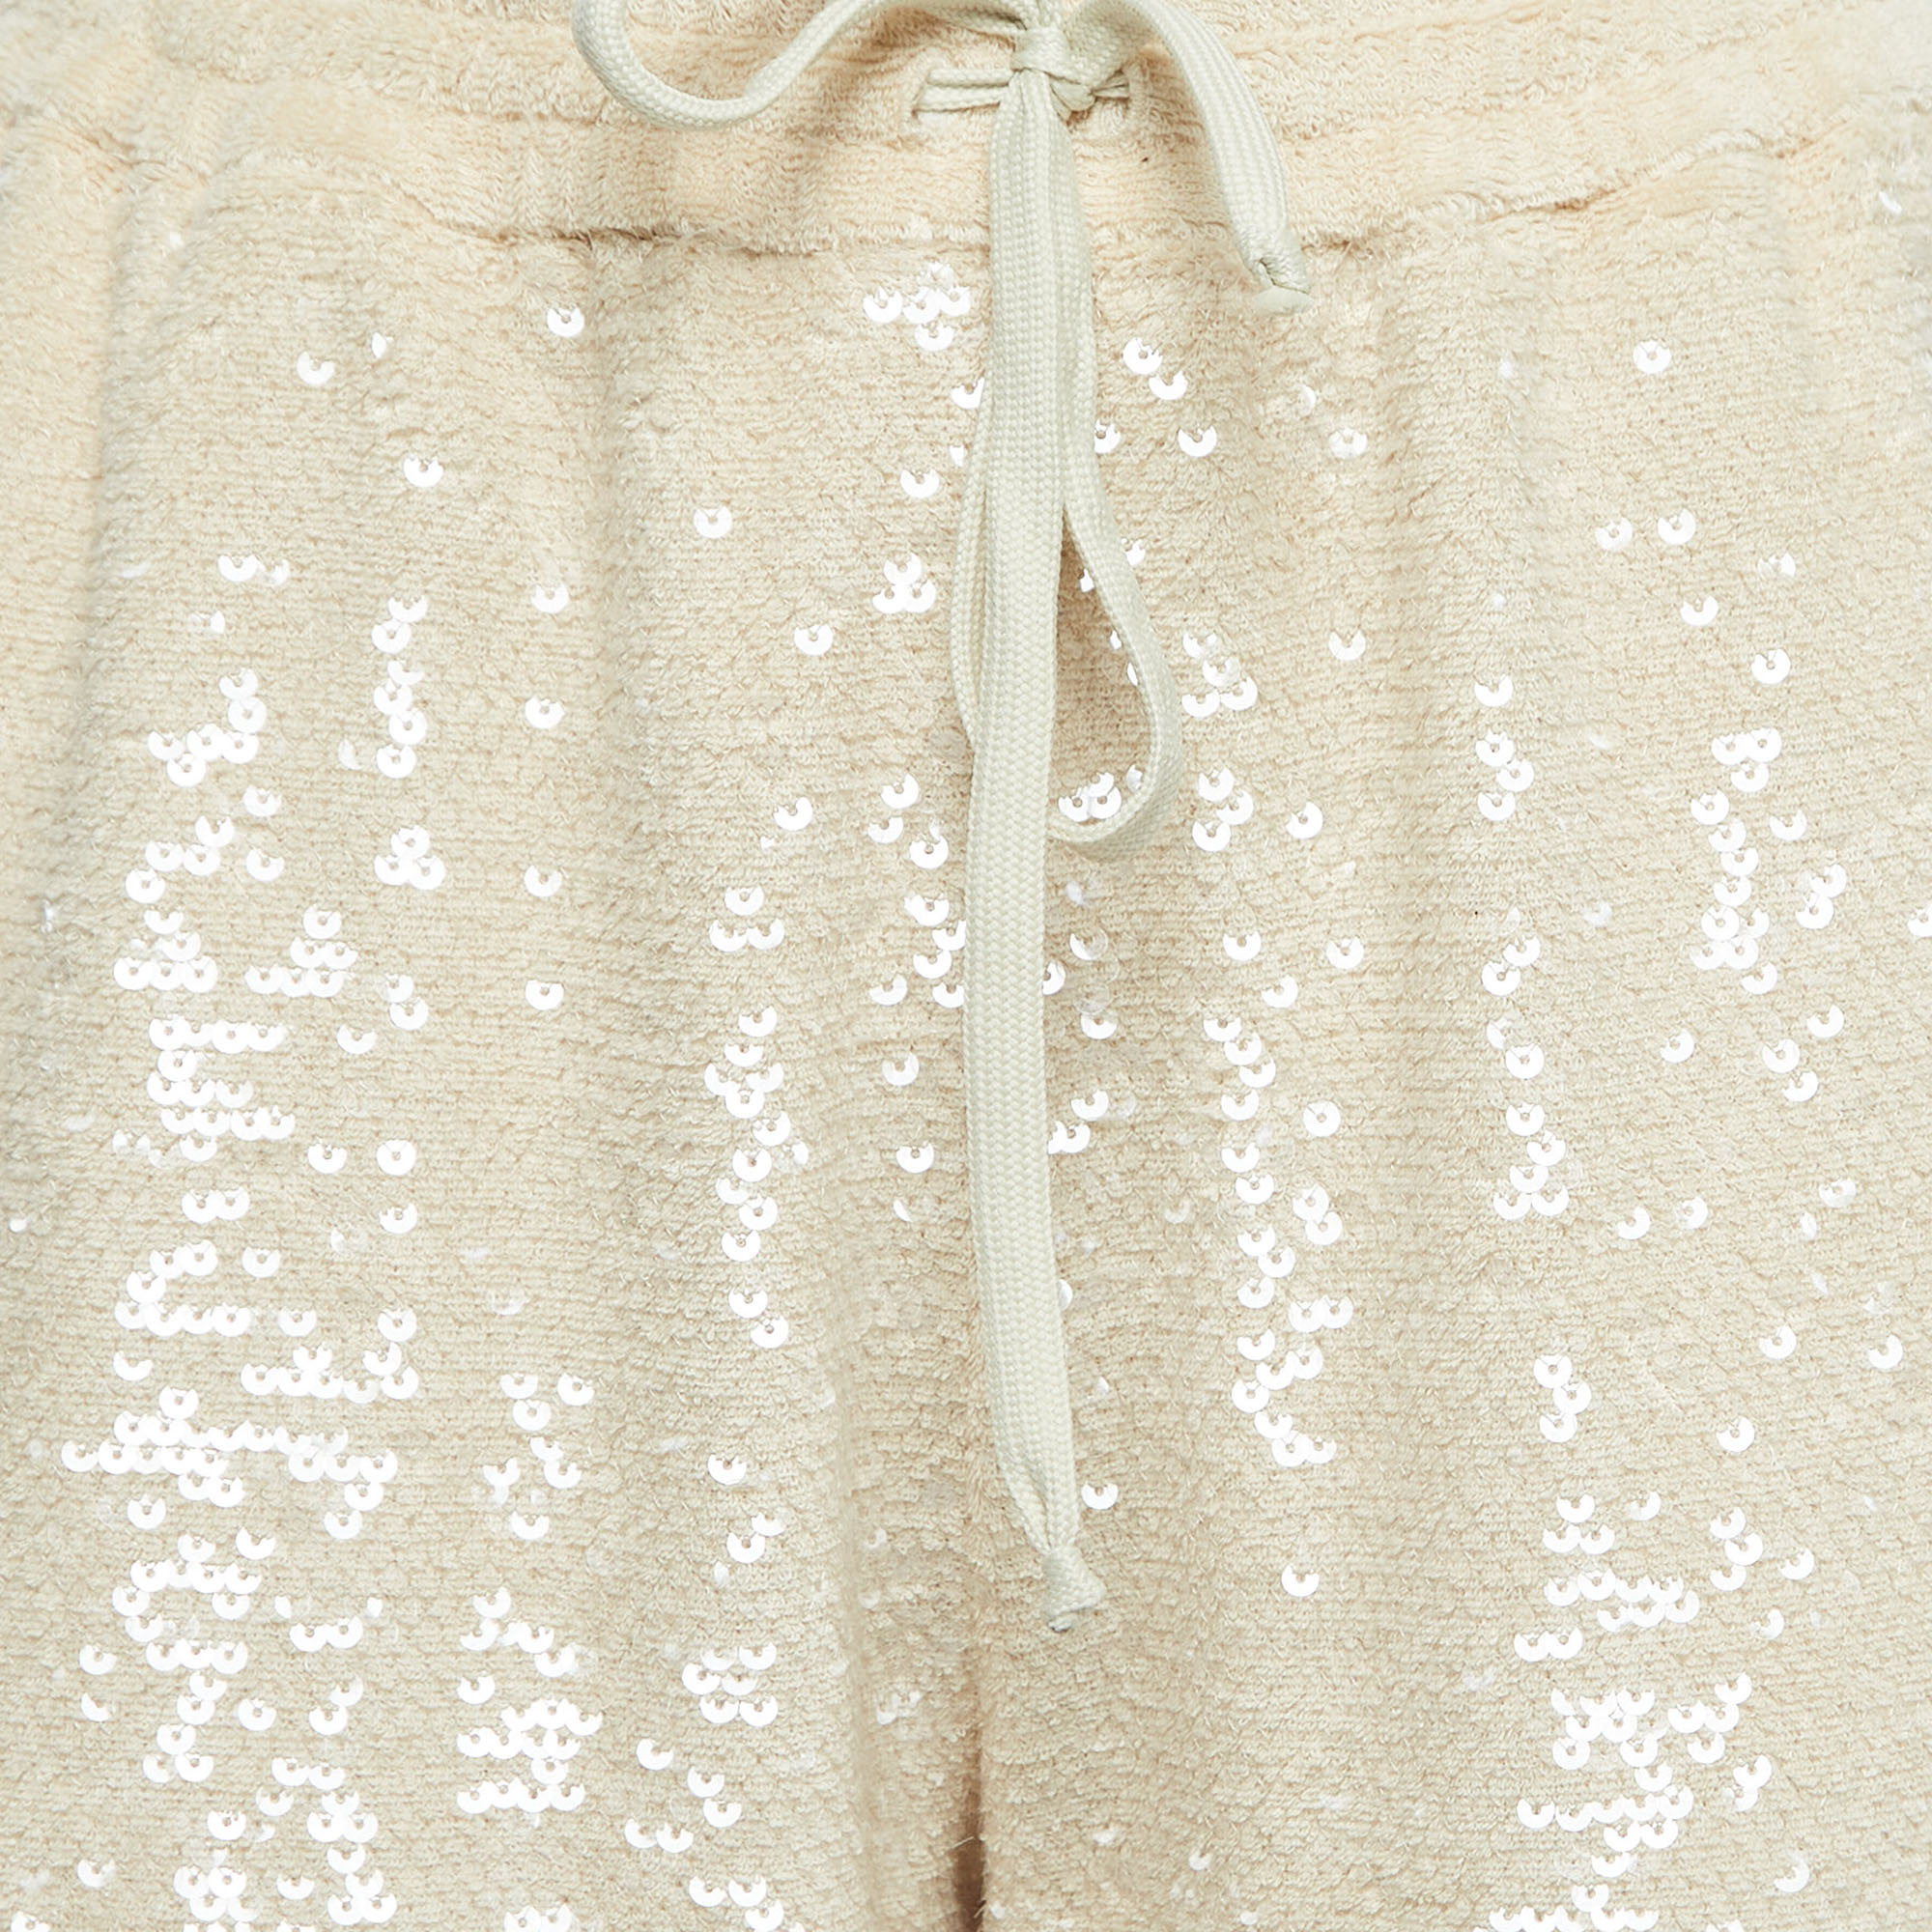 Gucci Beige Sequined Cotton Drawstring Joggers L